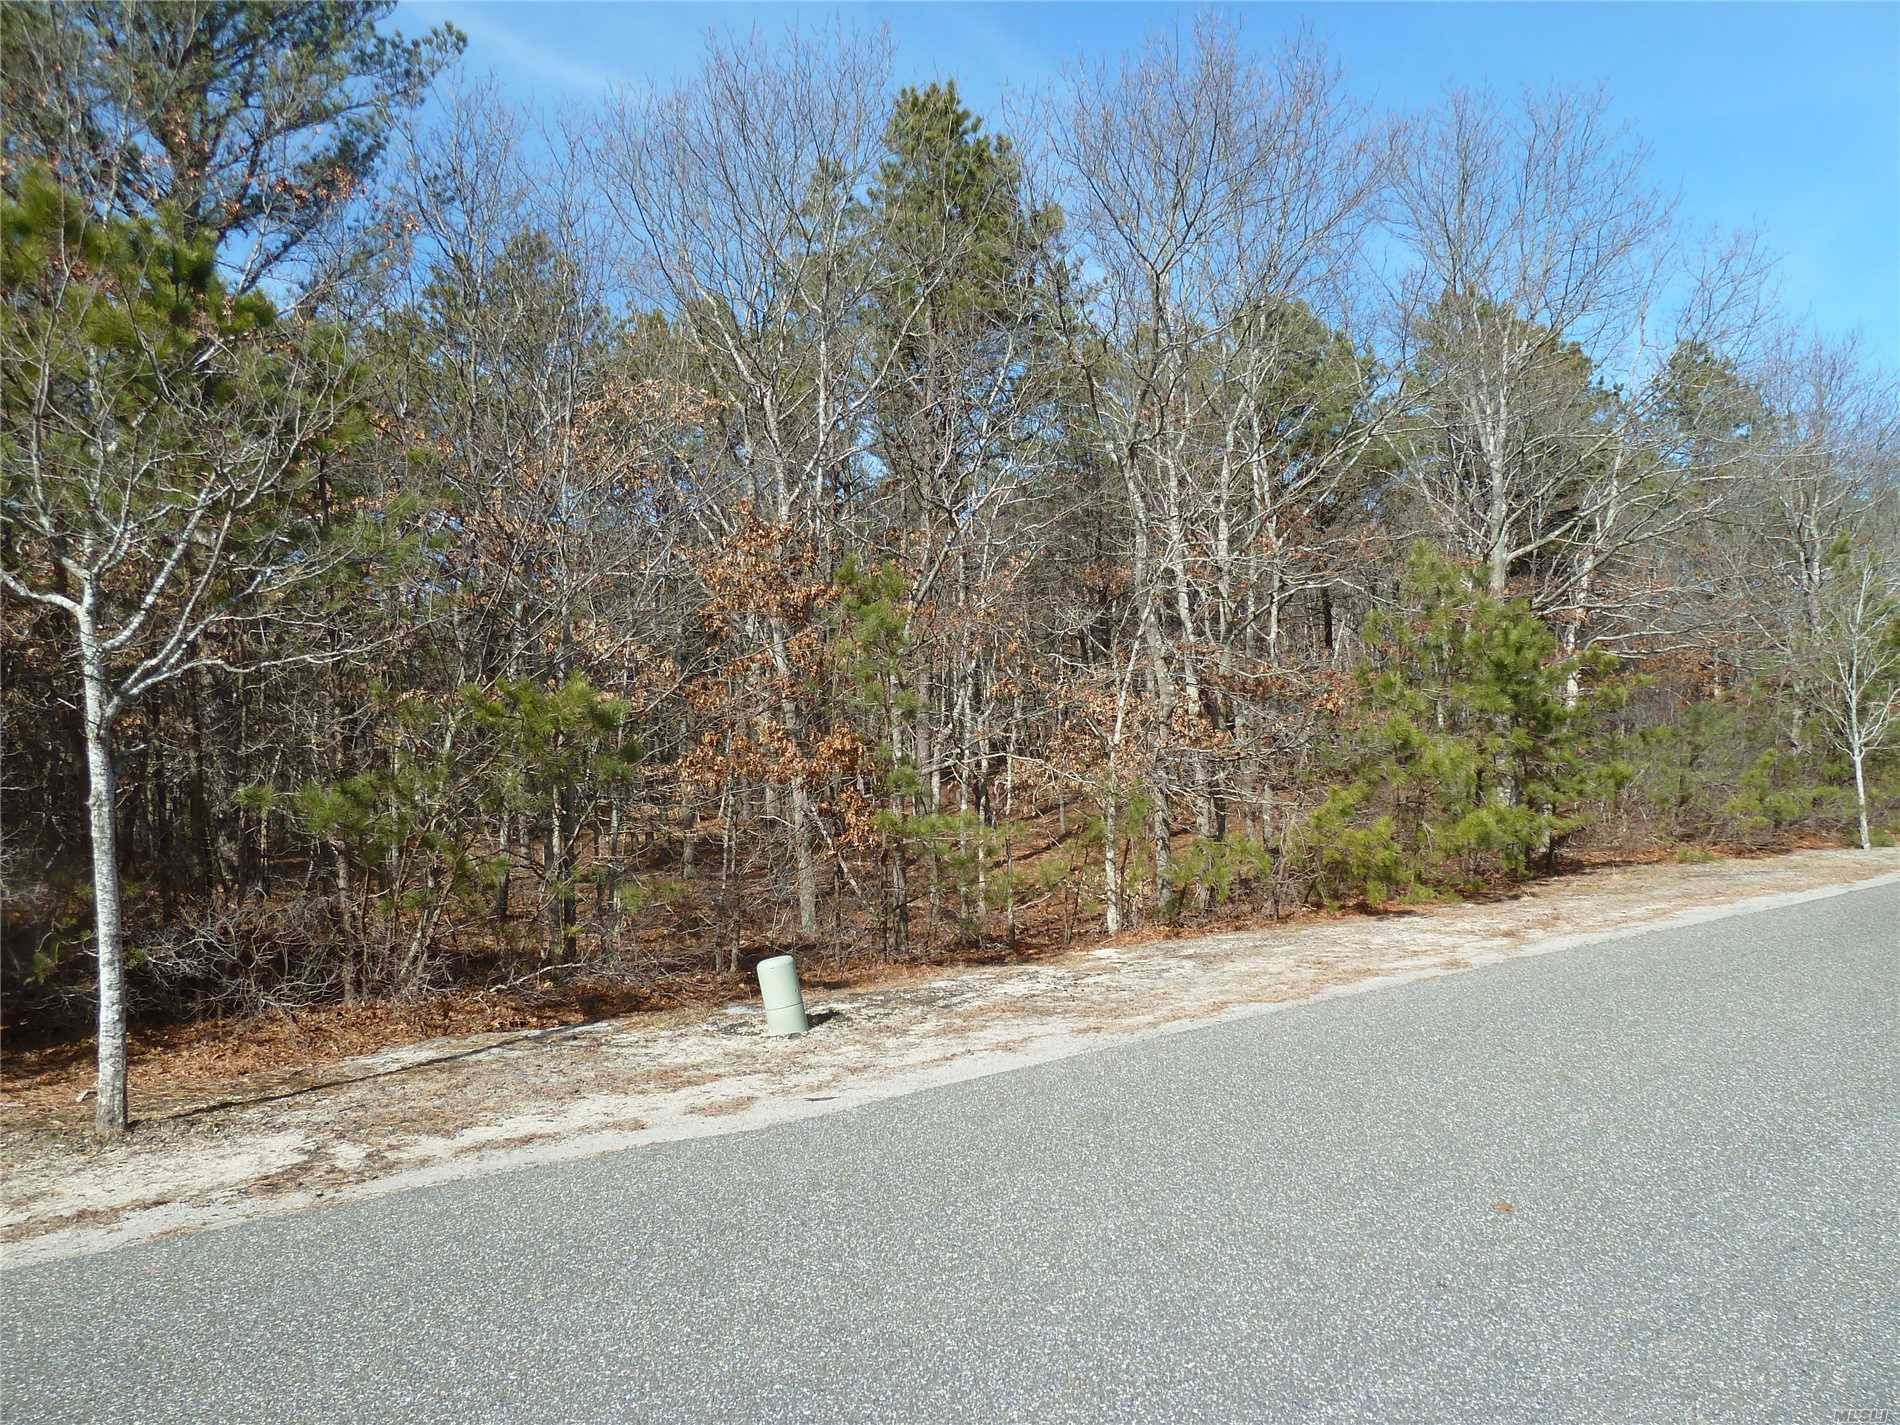 Great Property To Build A Wonderful Home In The Prestigious Southampton Pines Area.